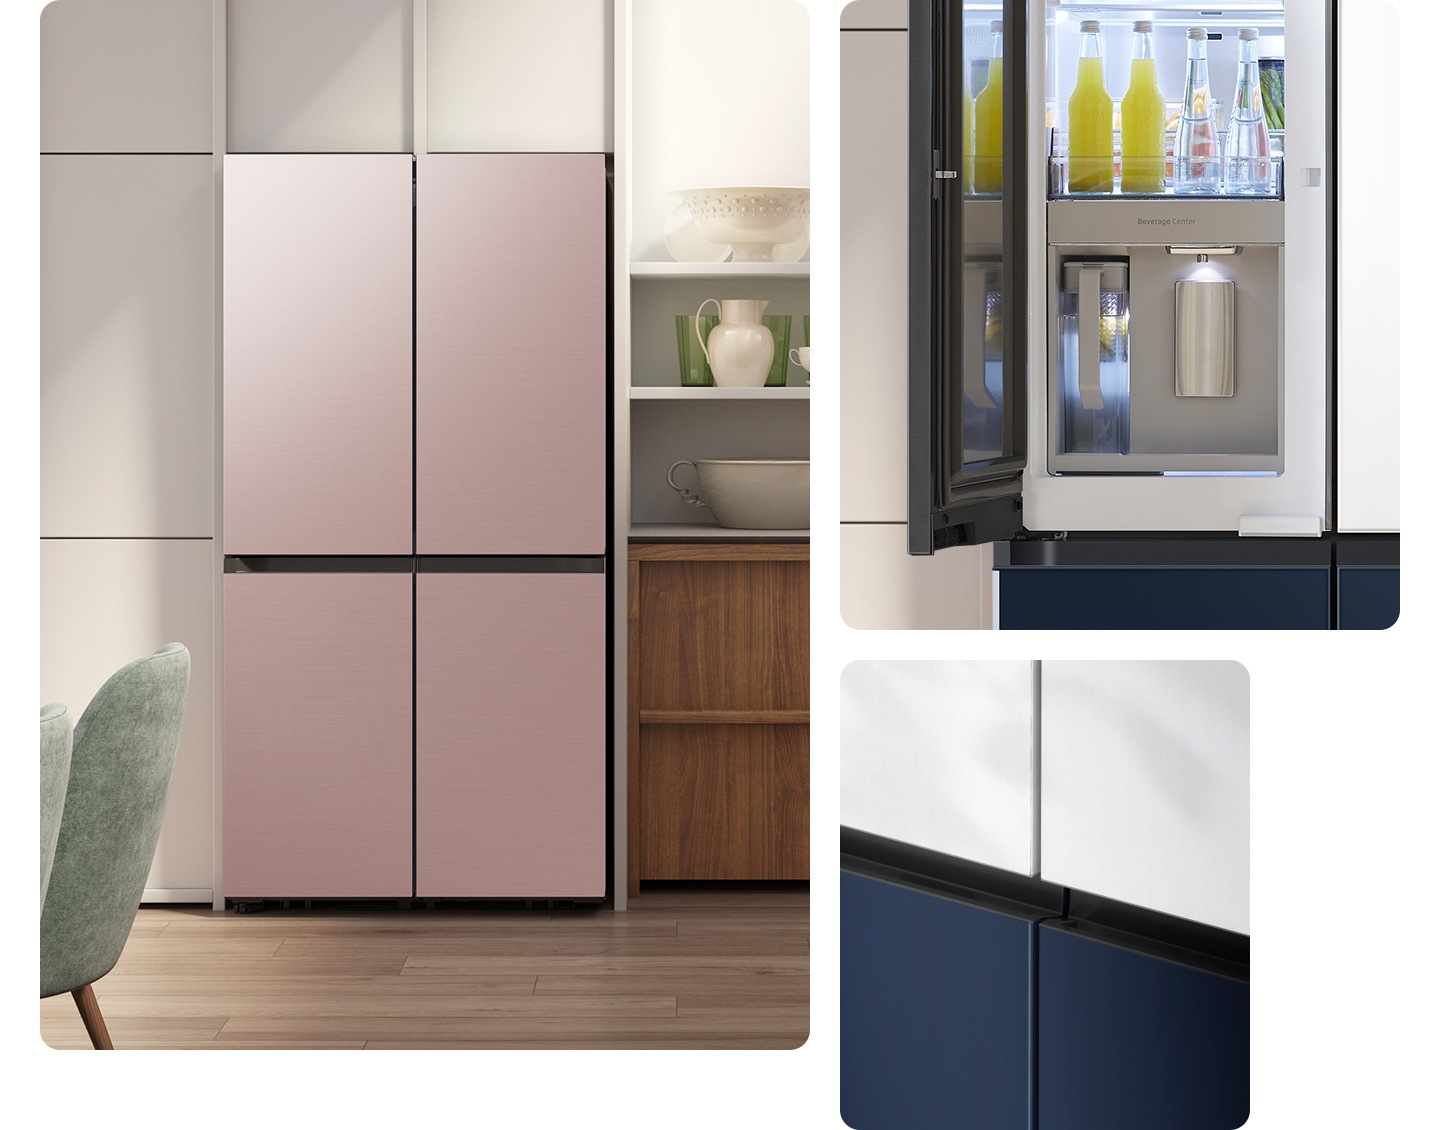 Samsung BESPOKE RF71A967535 French Door Refrigerator with Customisable ...